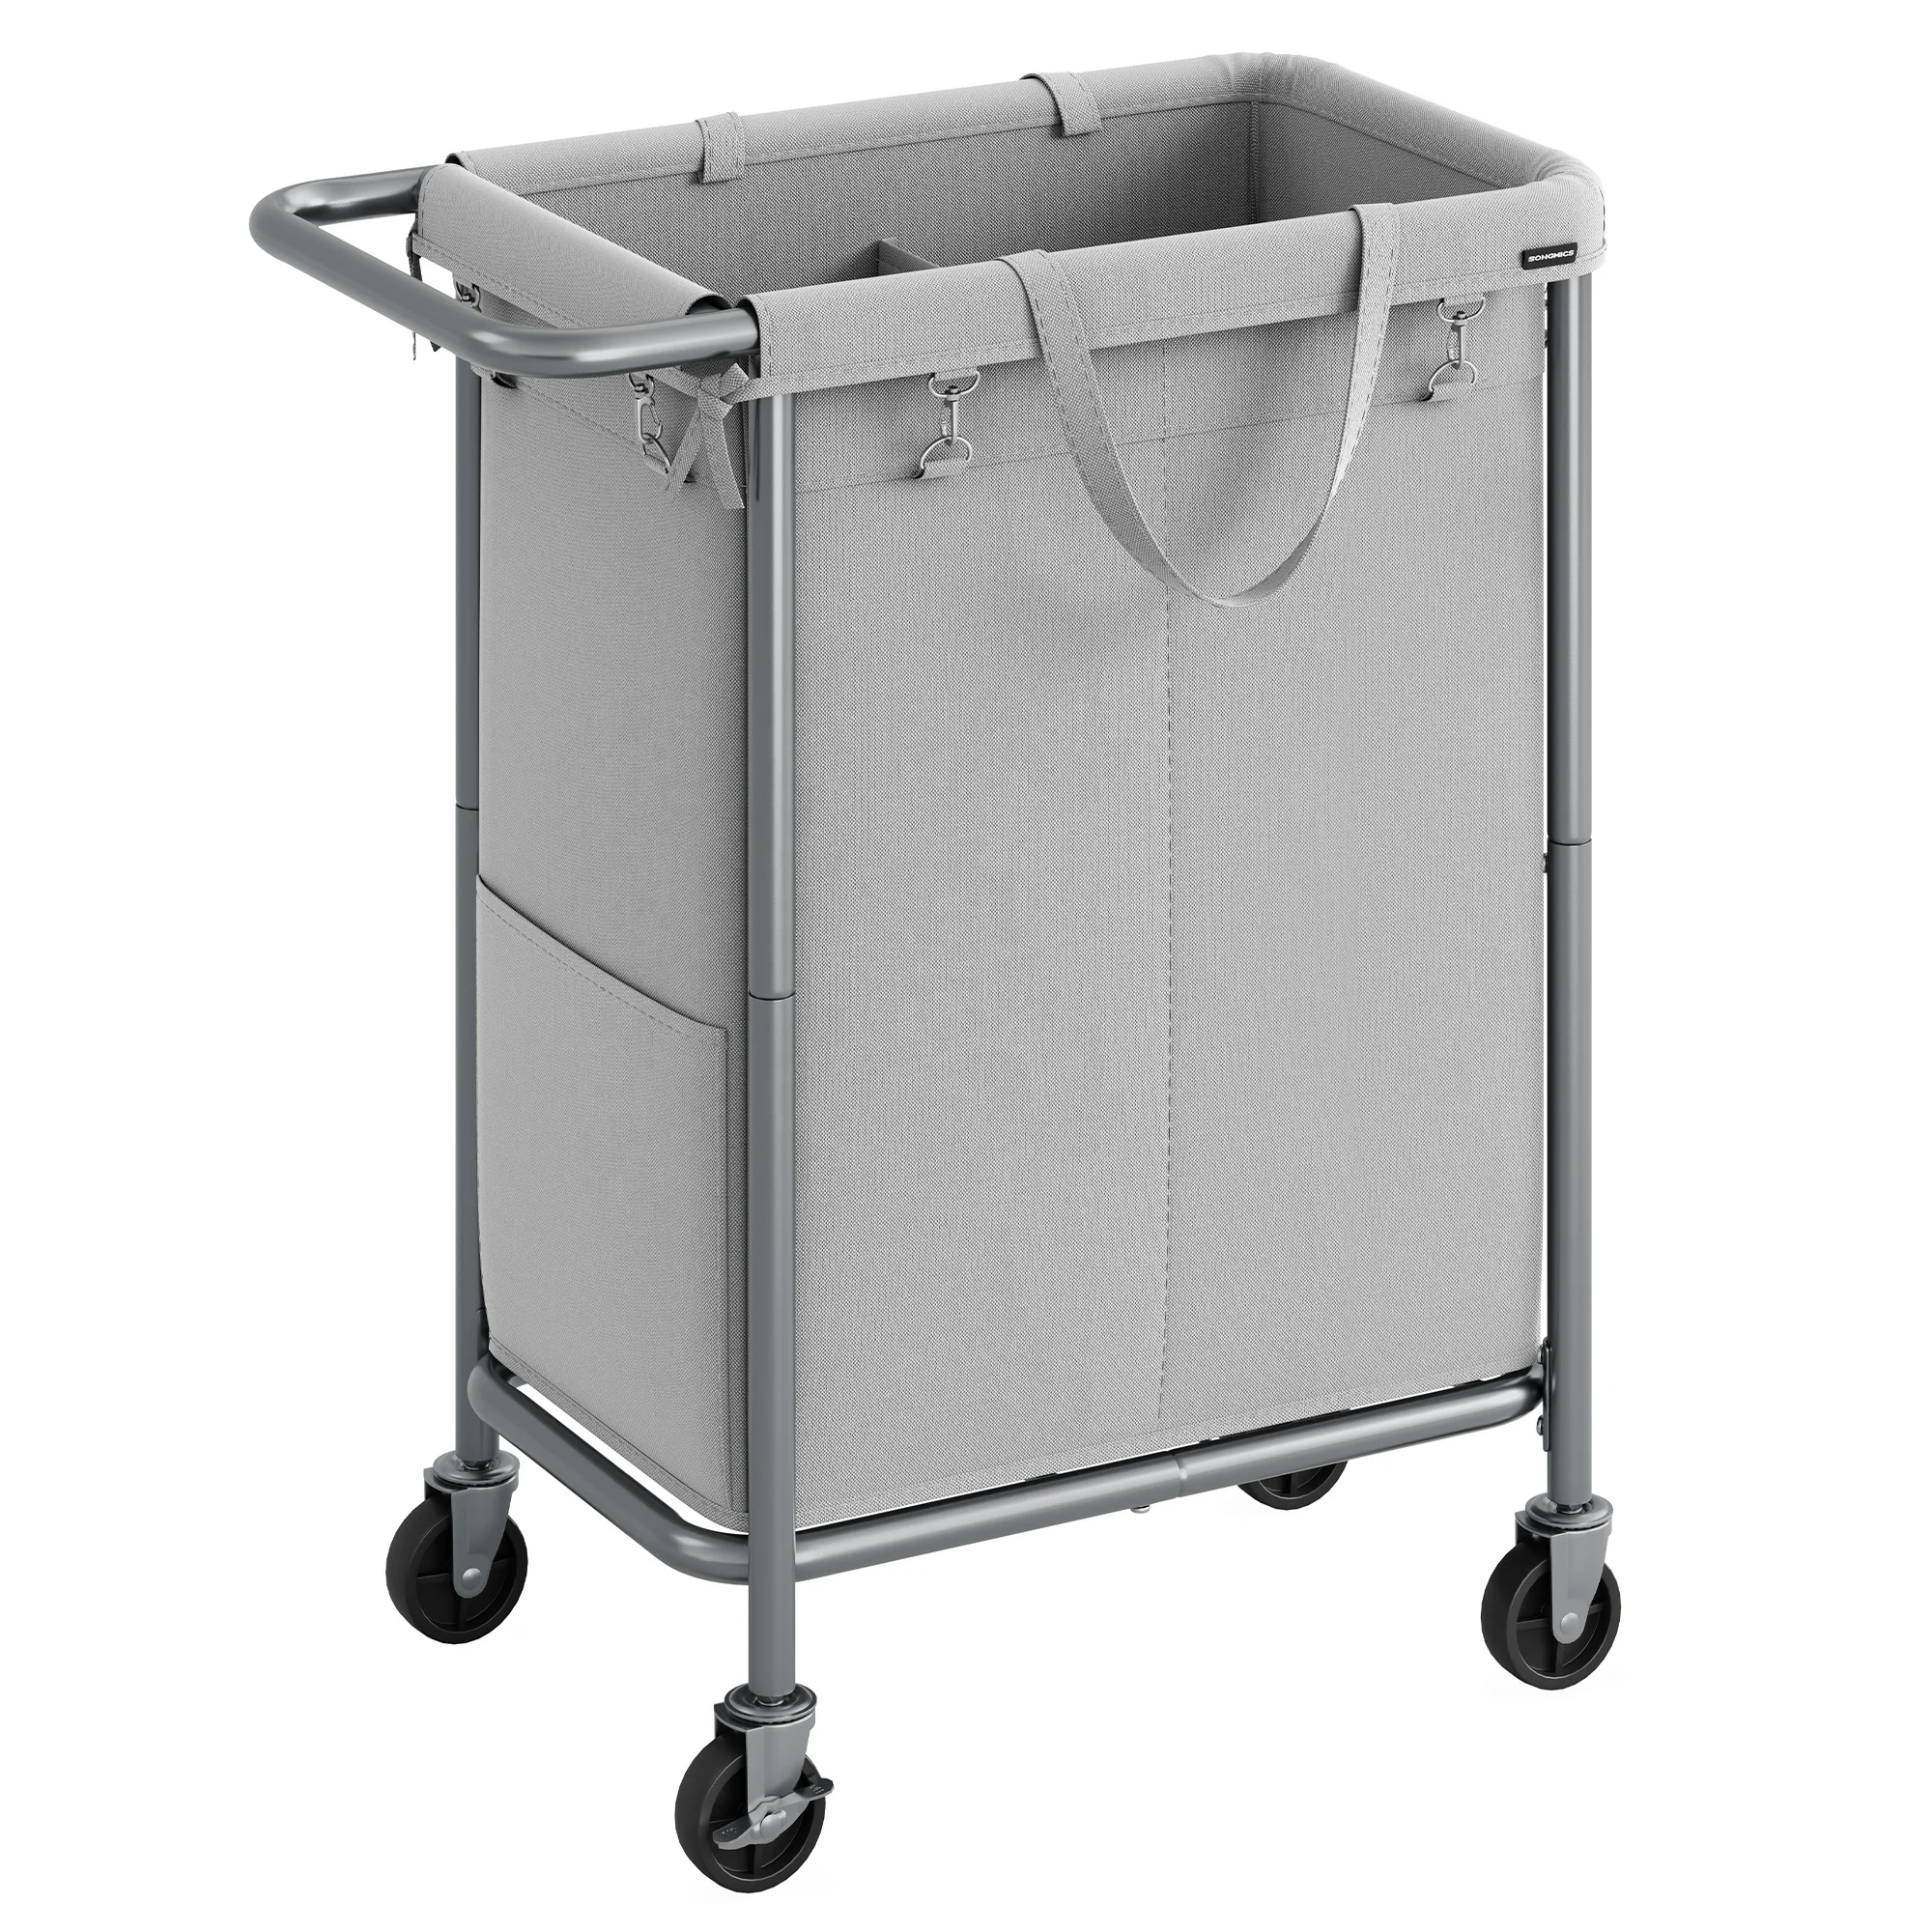 SONGMICS durable rolling Laundry Hamper with Metal Frame Customized dirty clothes laundry basket